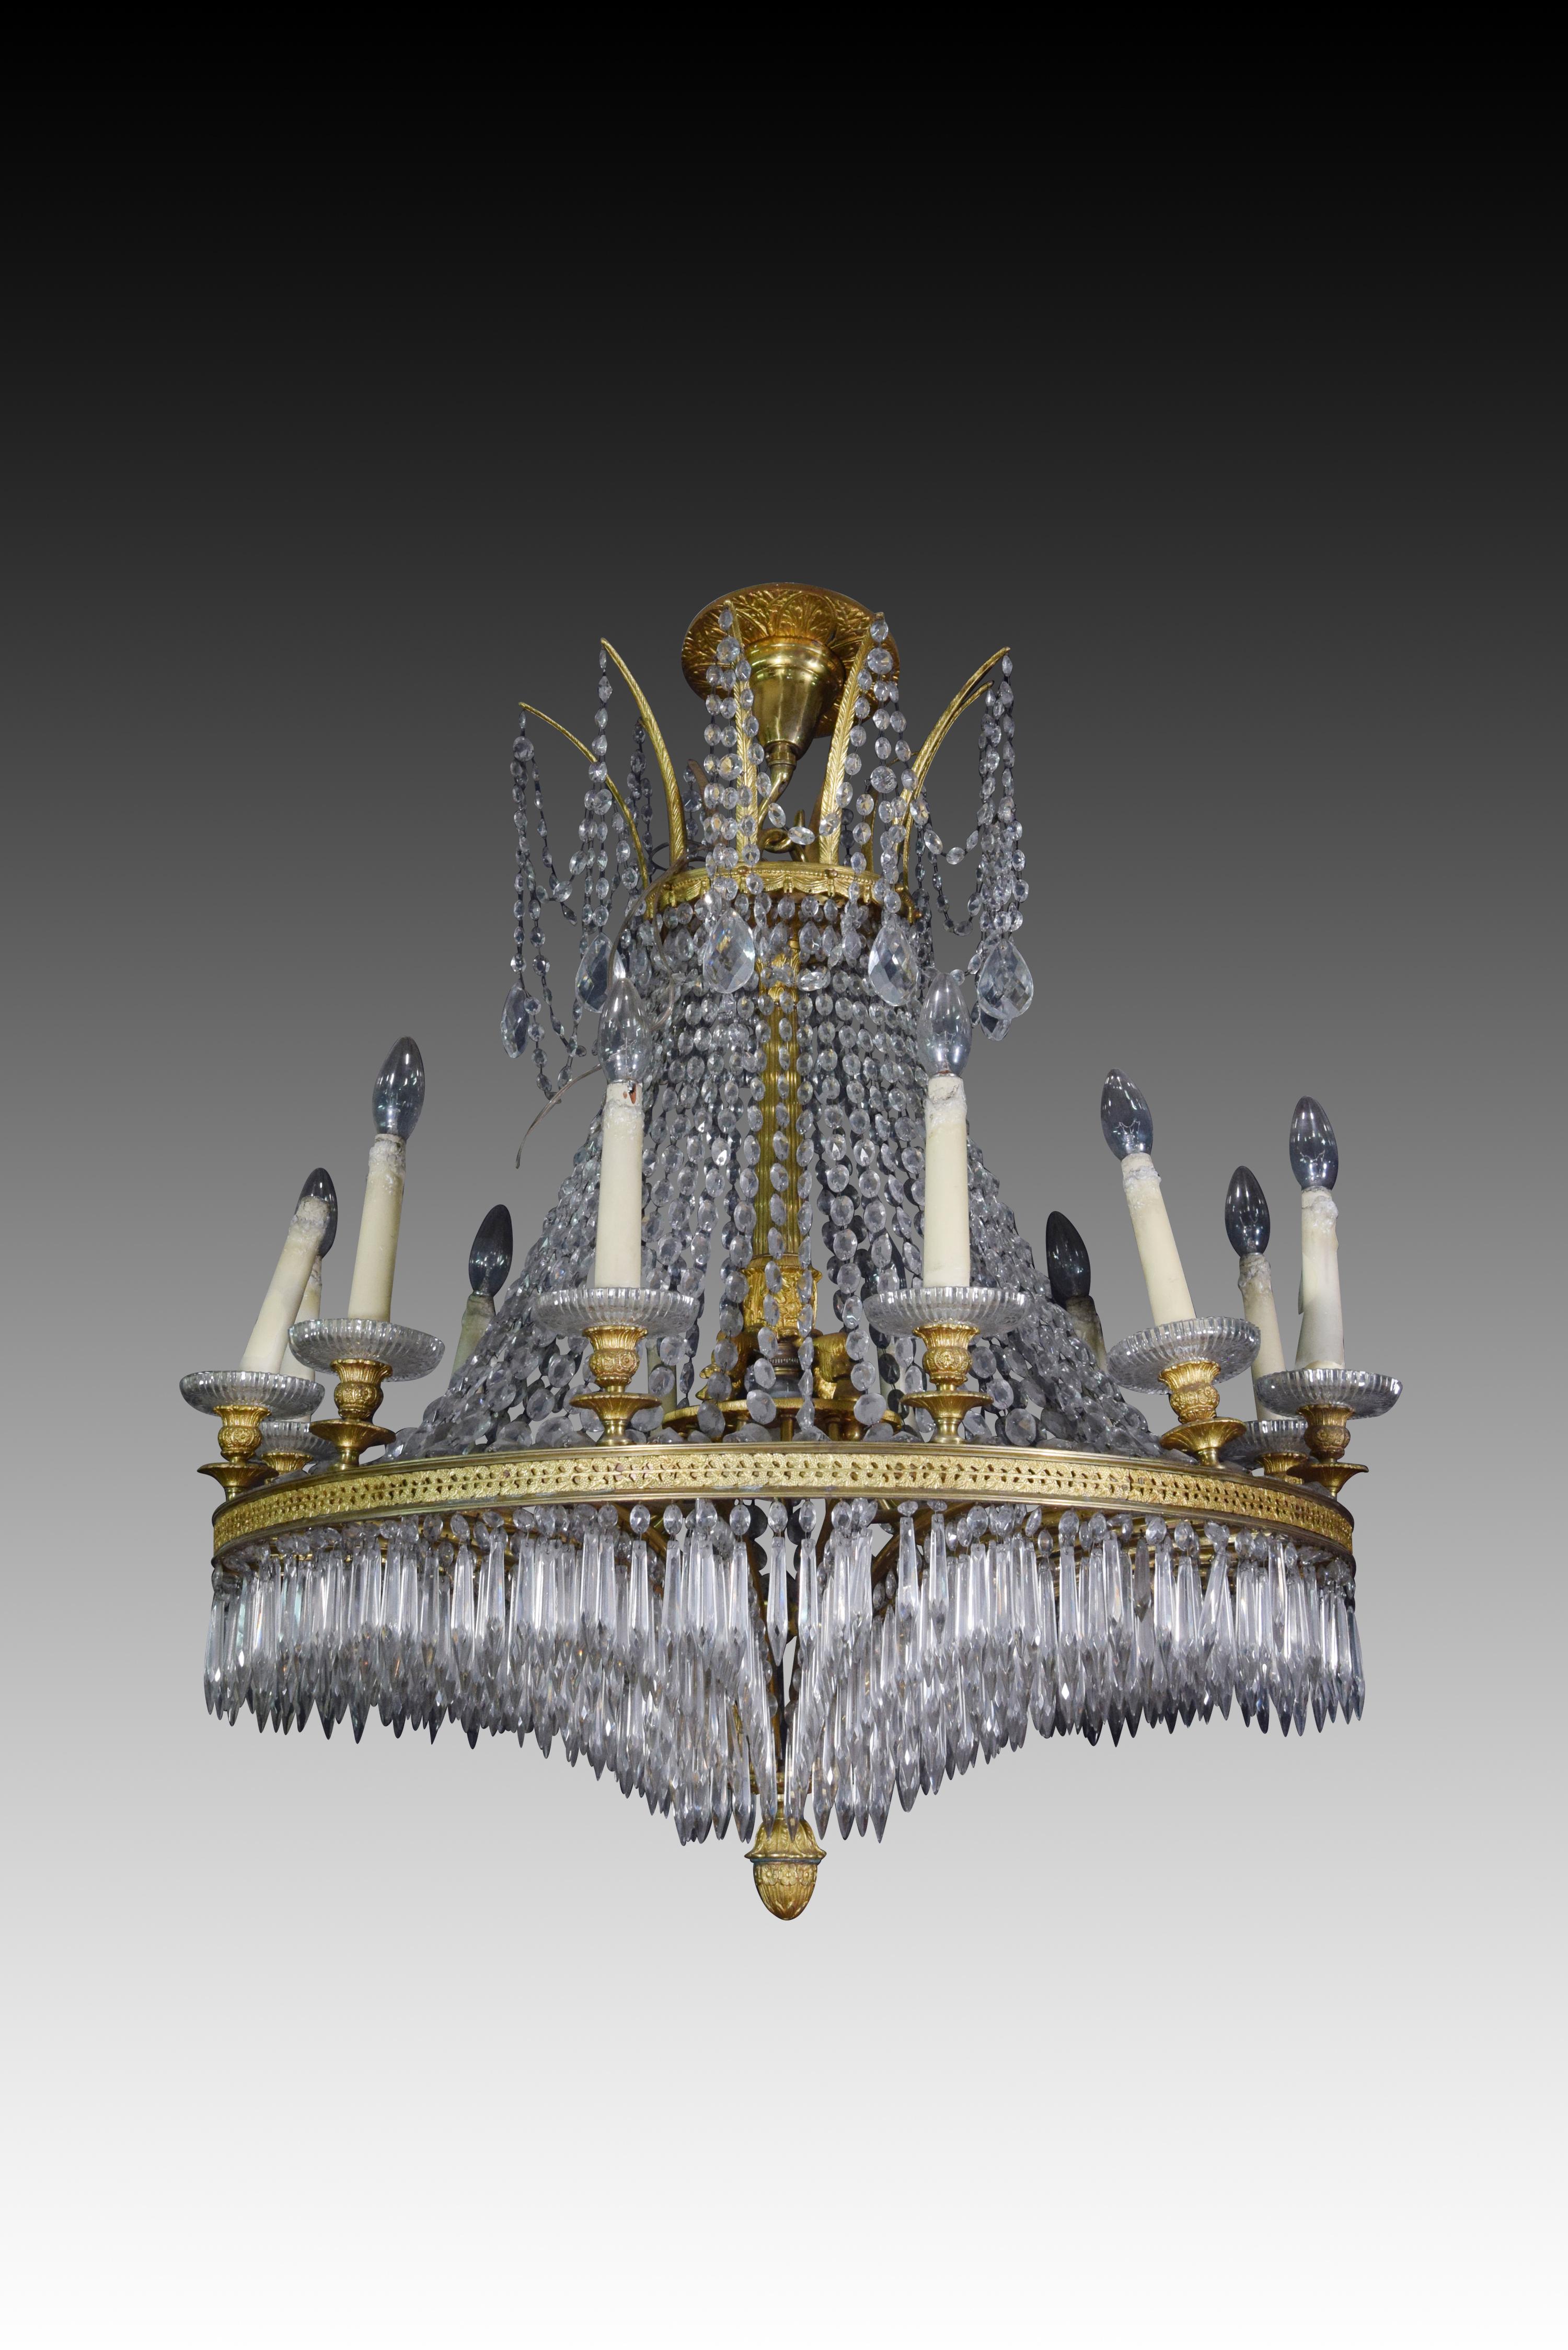 Ceiling lamp, twelve lights. Bronze, glass. XIX century. 
Ceiling lamp with a gilded bronze structure decorated with architectural and plant elements of clear classicist influence, which has twelve light points (in the shape of a candle and a glass